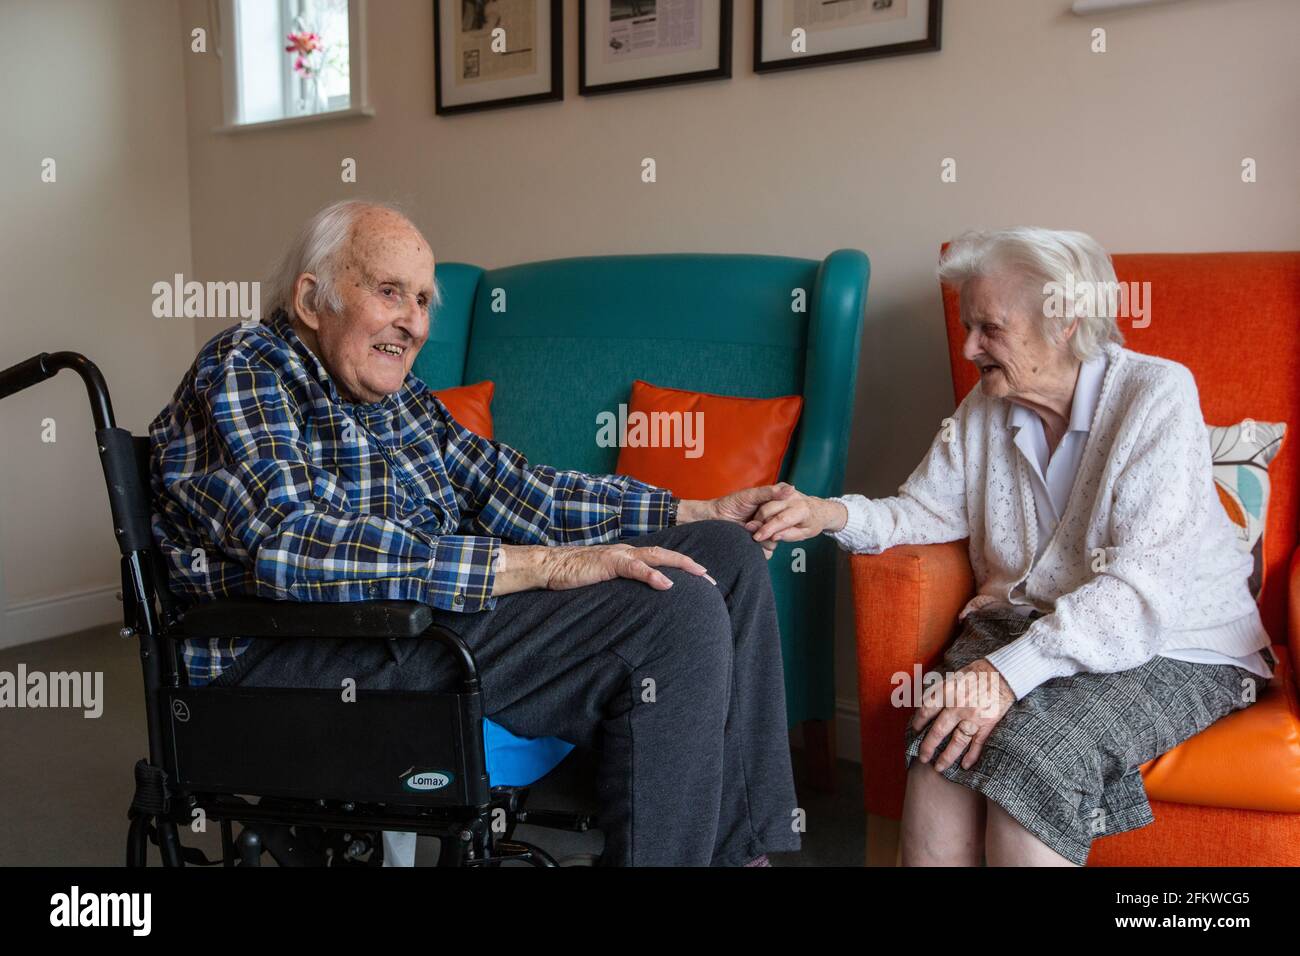 Elderly couple in their eighties reunited in a care come after being separated for several weeks due to the Coronavirus Pandemic, Hampshire, England. Stock Photo